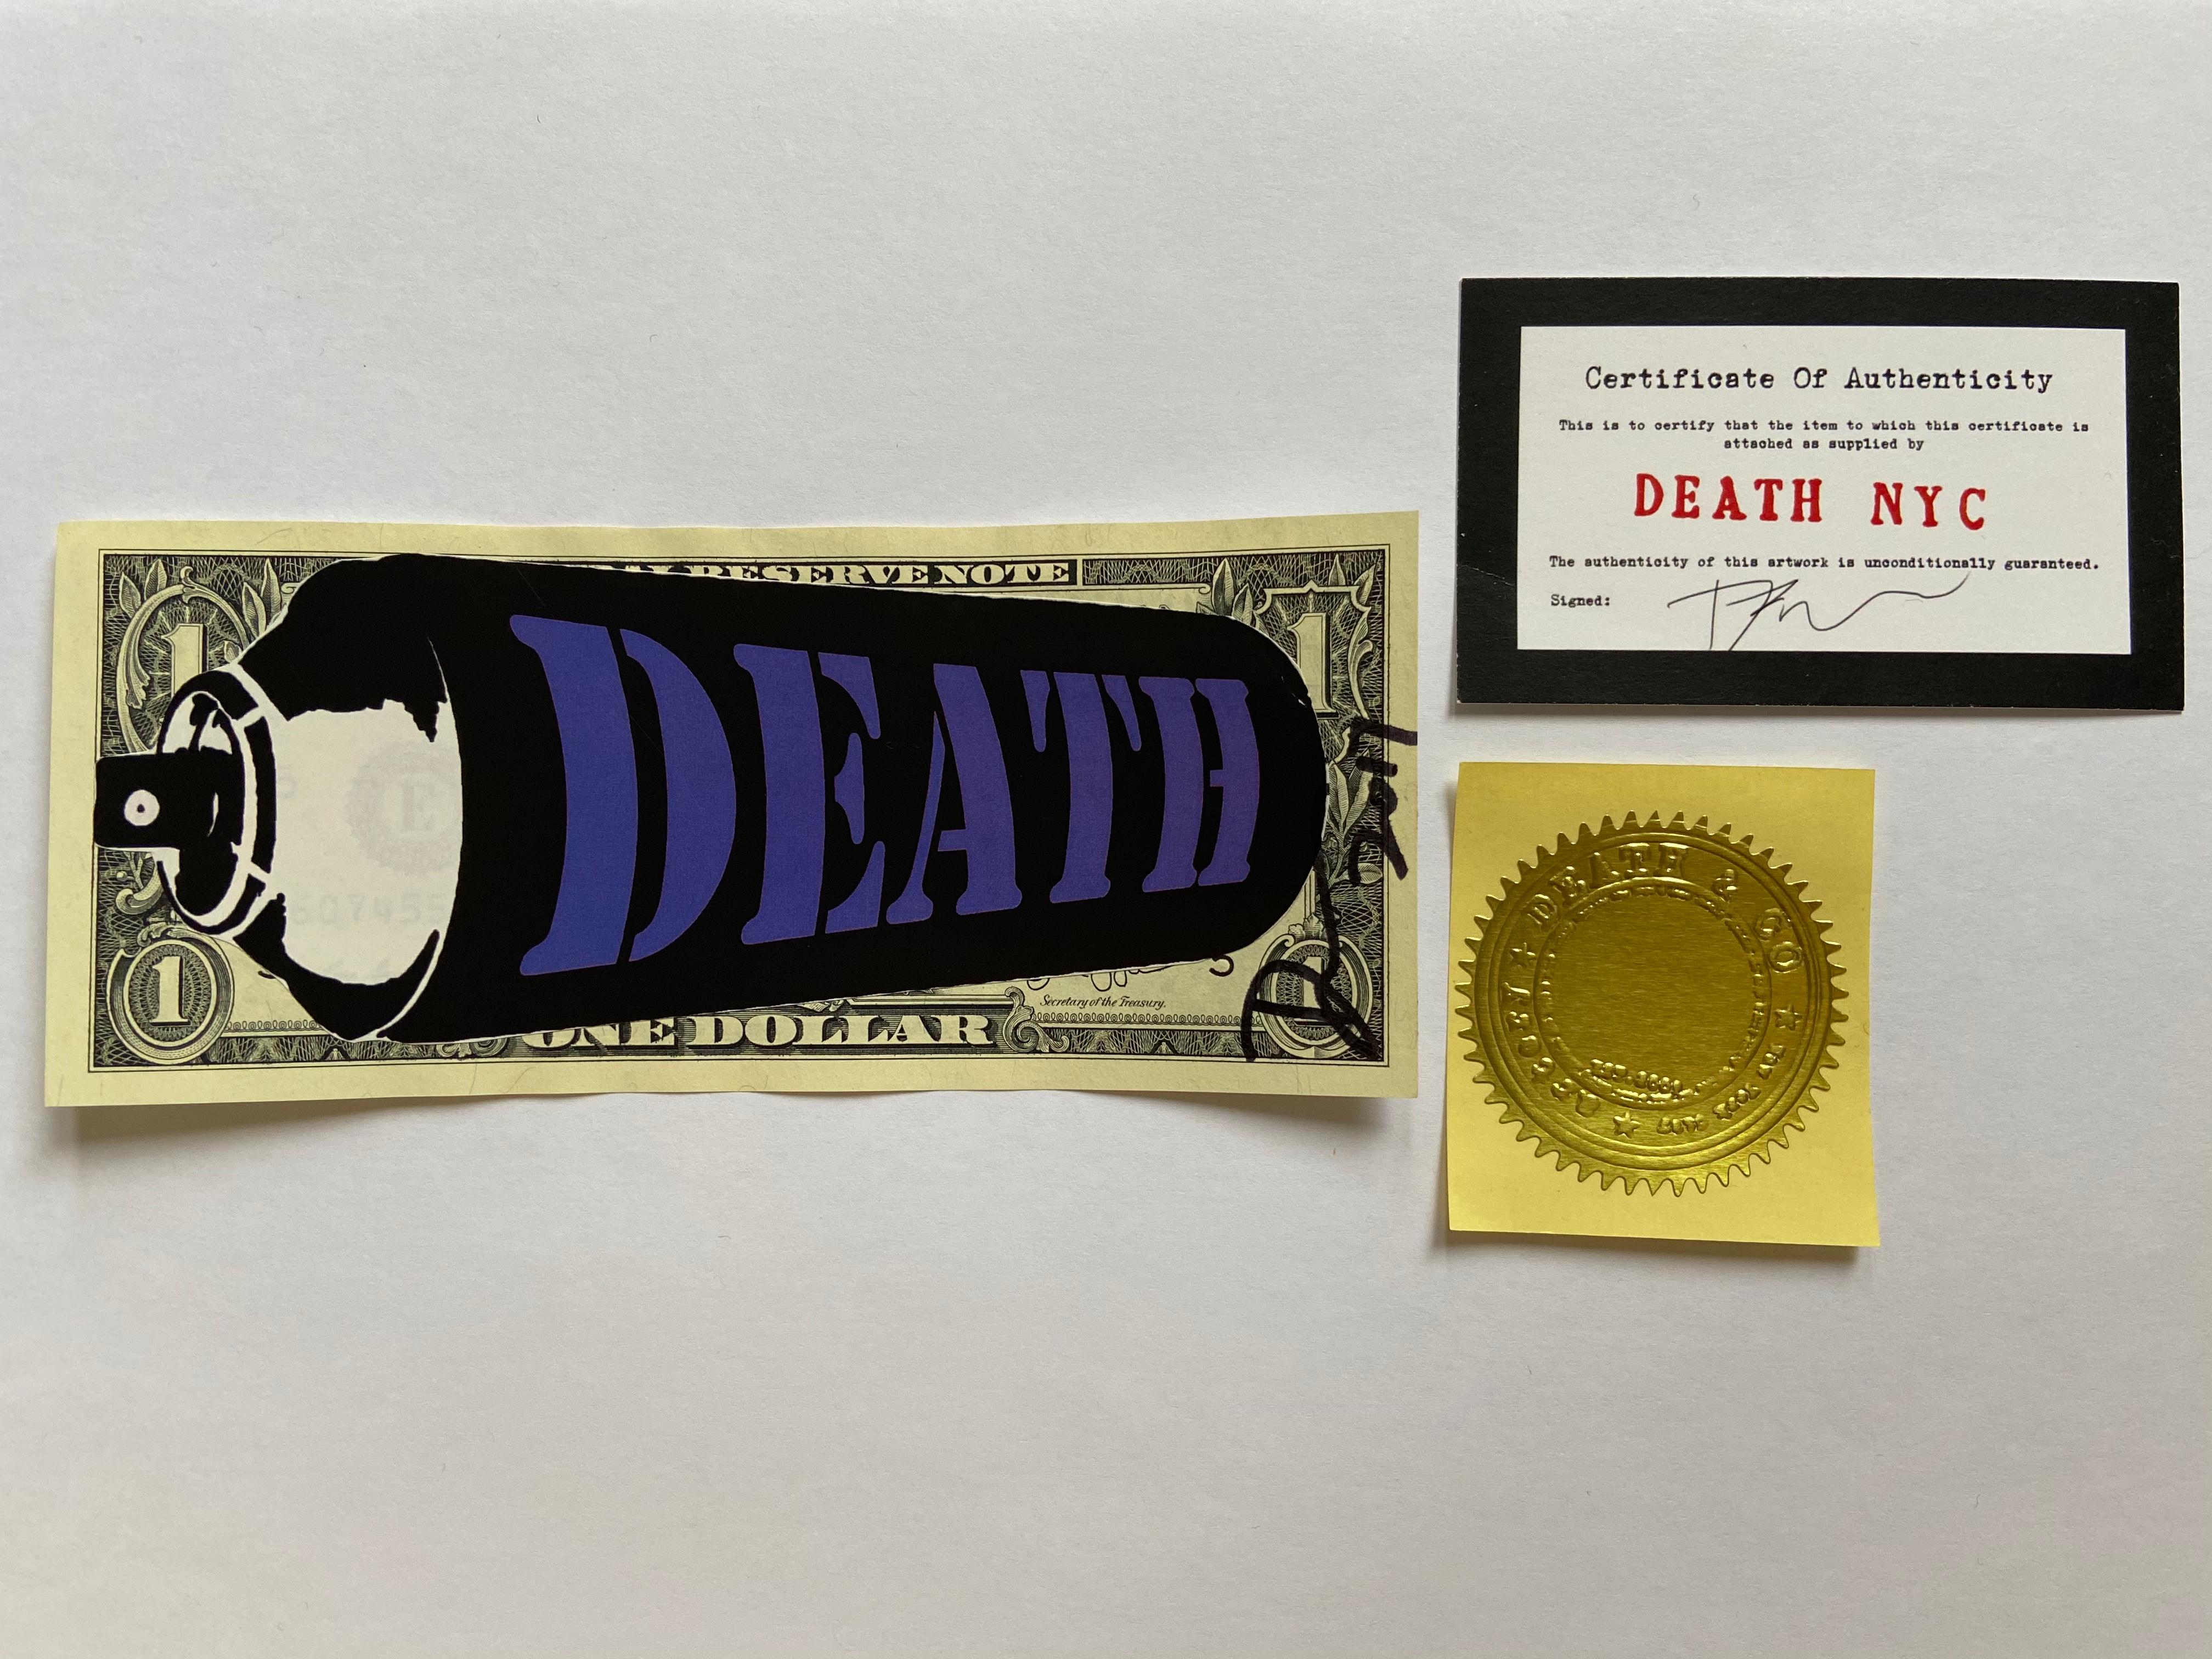 Death NYC
PURPLE DEATH SPRAY 
2017
Gluing on 1 dollar notes
Signed by the artist
Size: 7 x 15.5 cm
Original copy, delivered with certificate of authenticity and stamp of the artist
Perfect condition 
99 euros